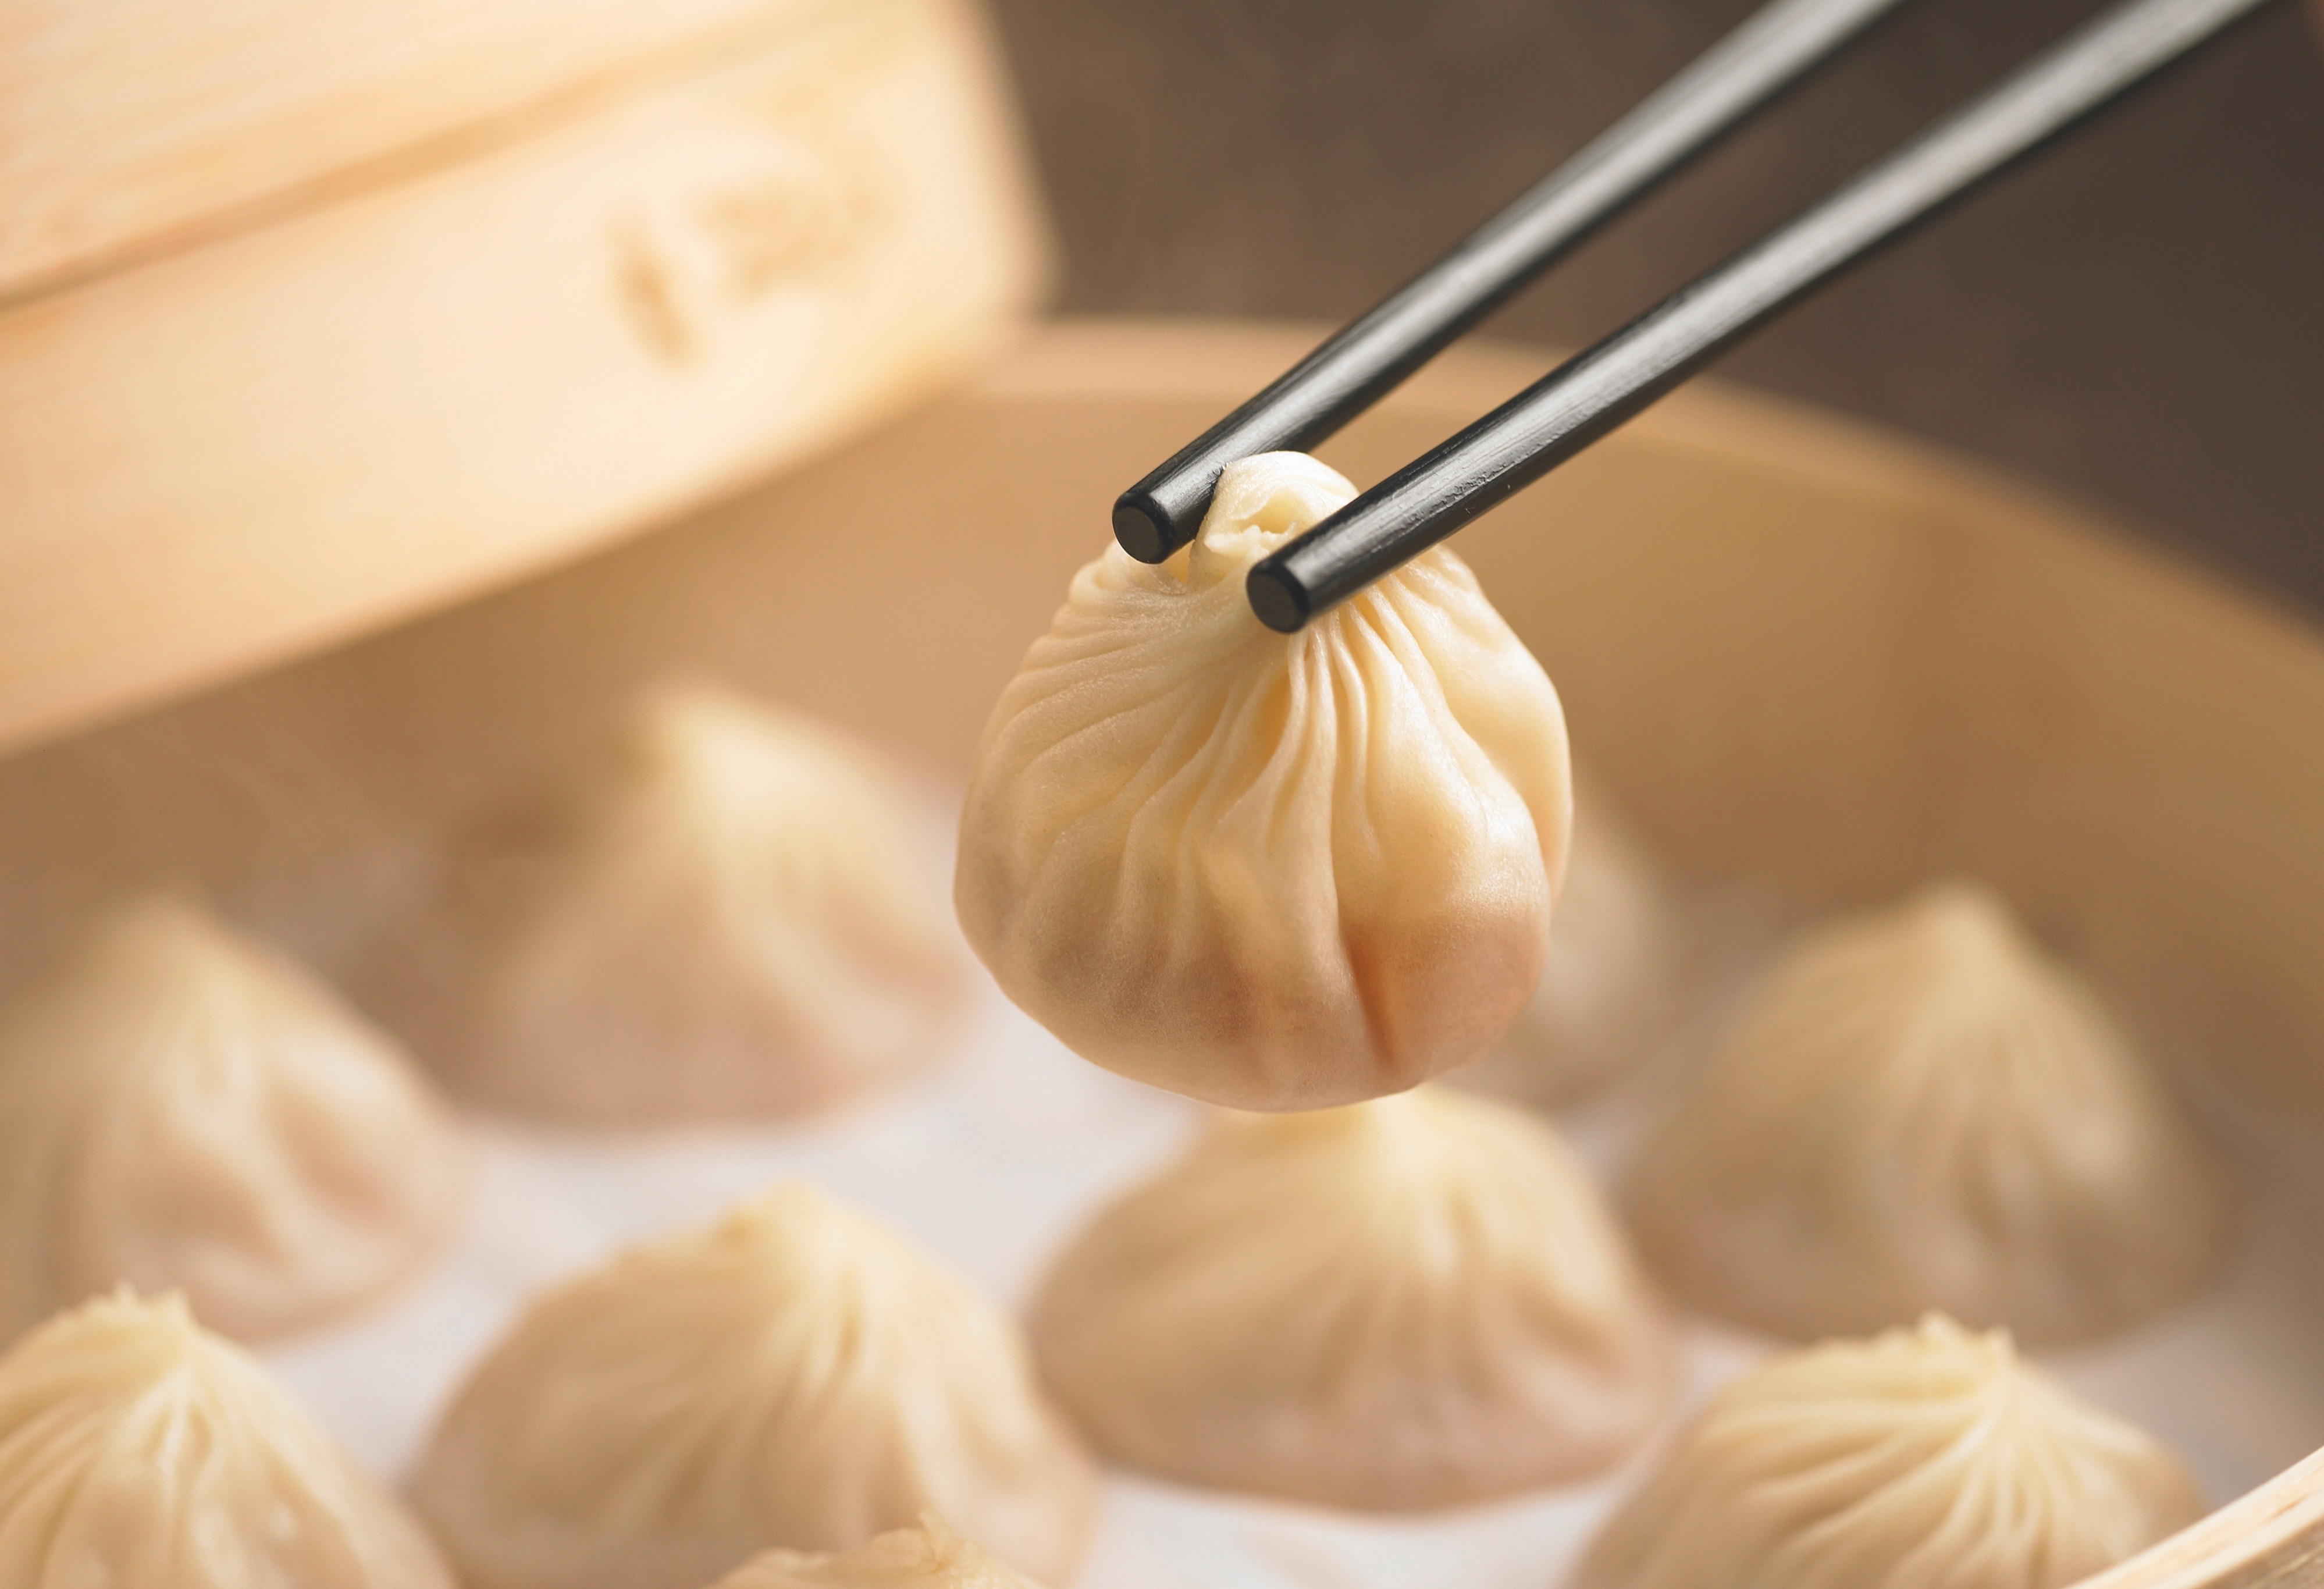 A single xiao long bao being picked up by chopsticks in close focus, with more xiao long bao in a steamer in the background, obscured by bokkeh.